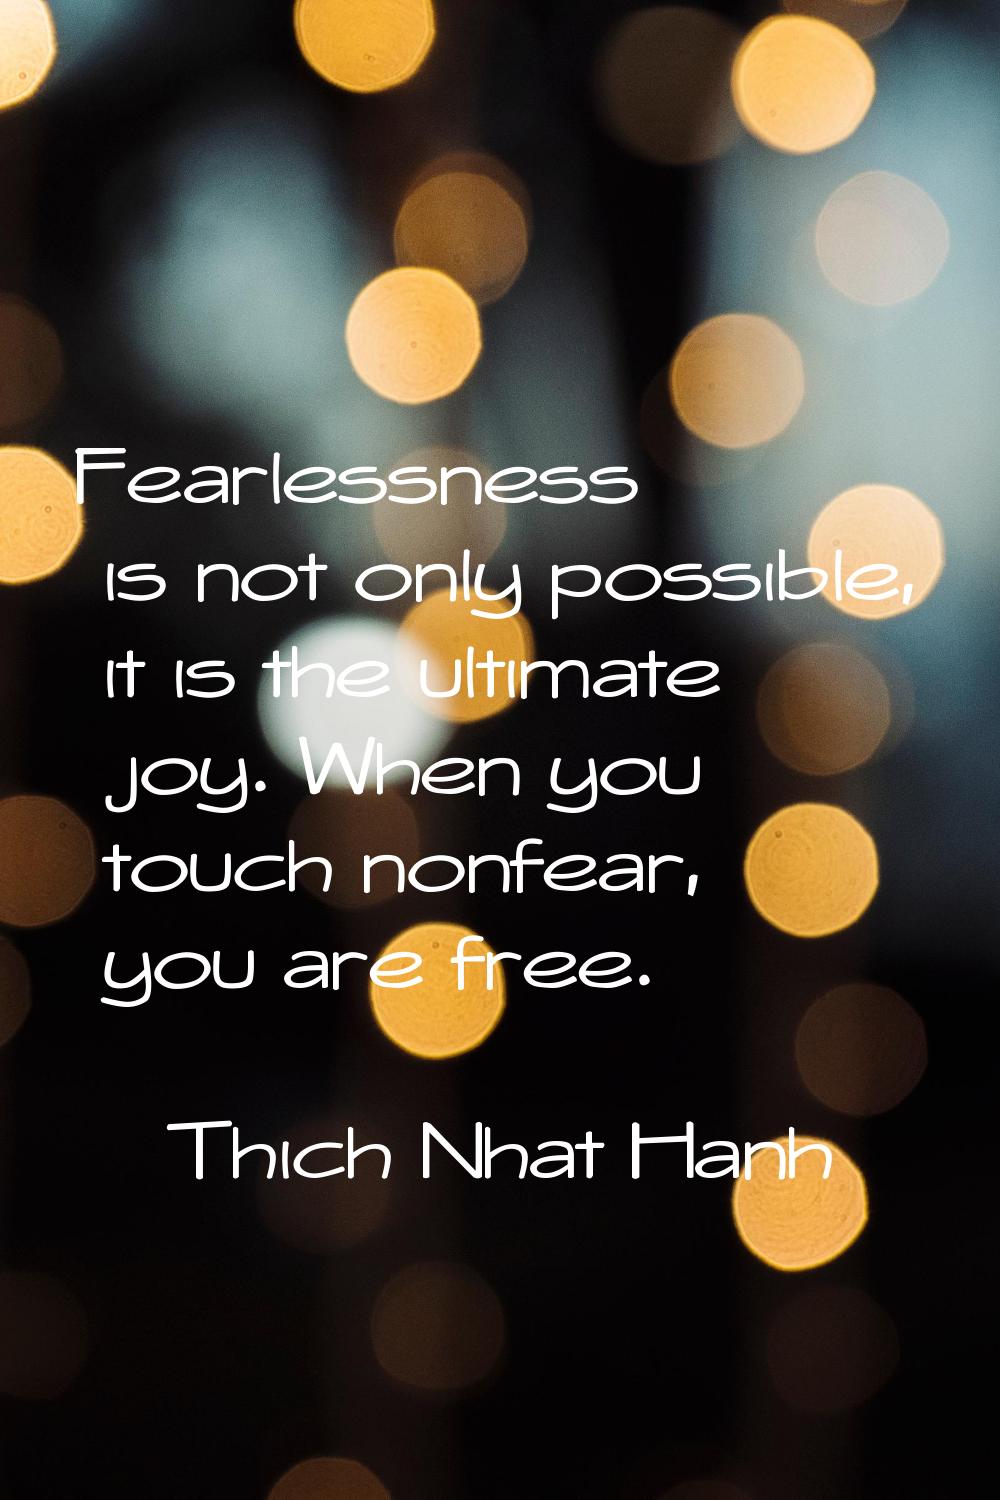 Fearlessness is not only possible, it is the ultimate joy. When you touch nonfear, you are free.